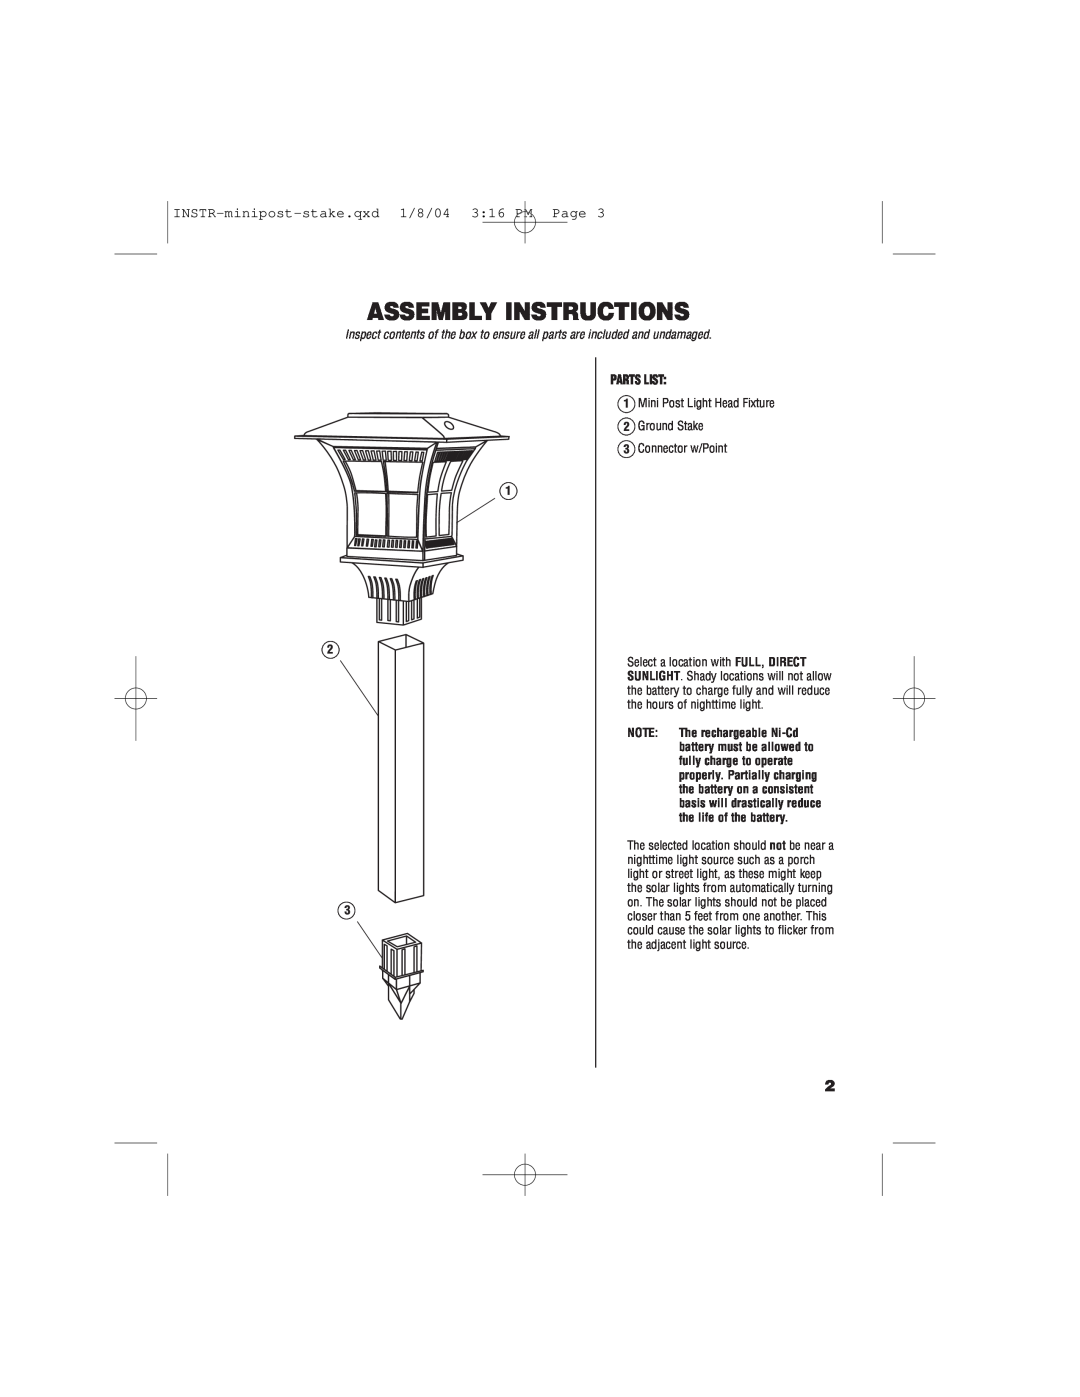 Brinkmann 822-2500-2 owner manual Assembly Instructions, Parts List, INSTR-minipost-stake.qxd1/8/04 3 16 PM Page 